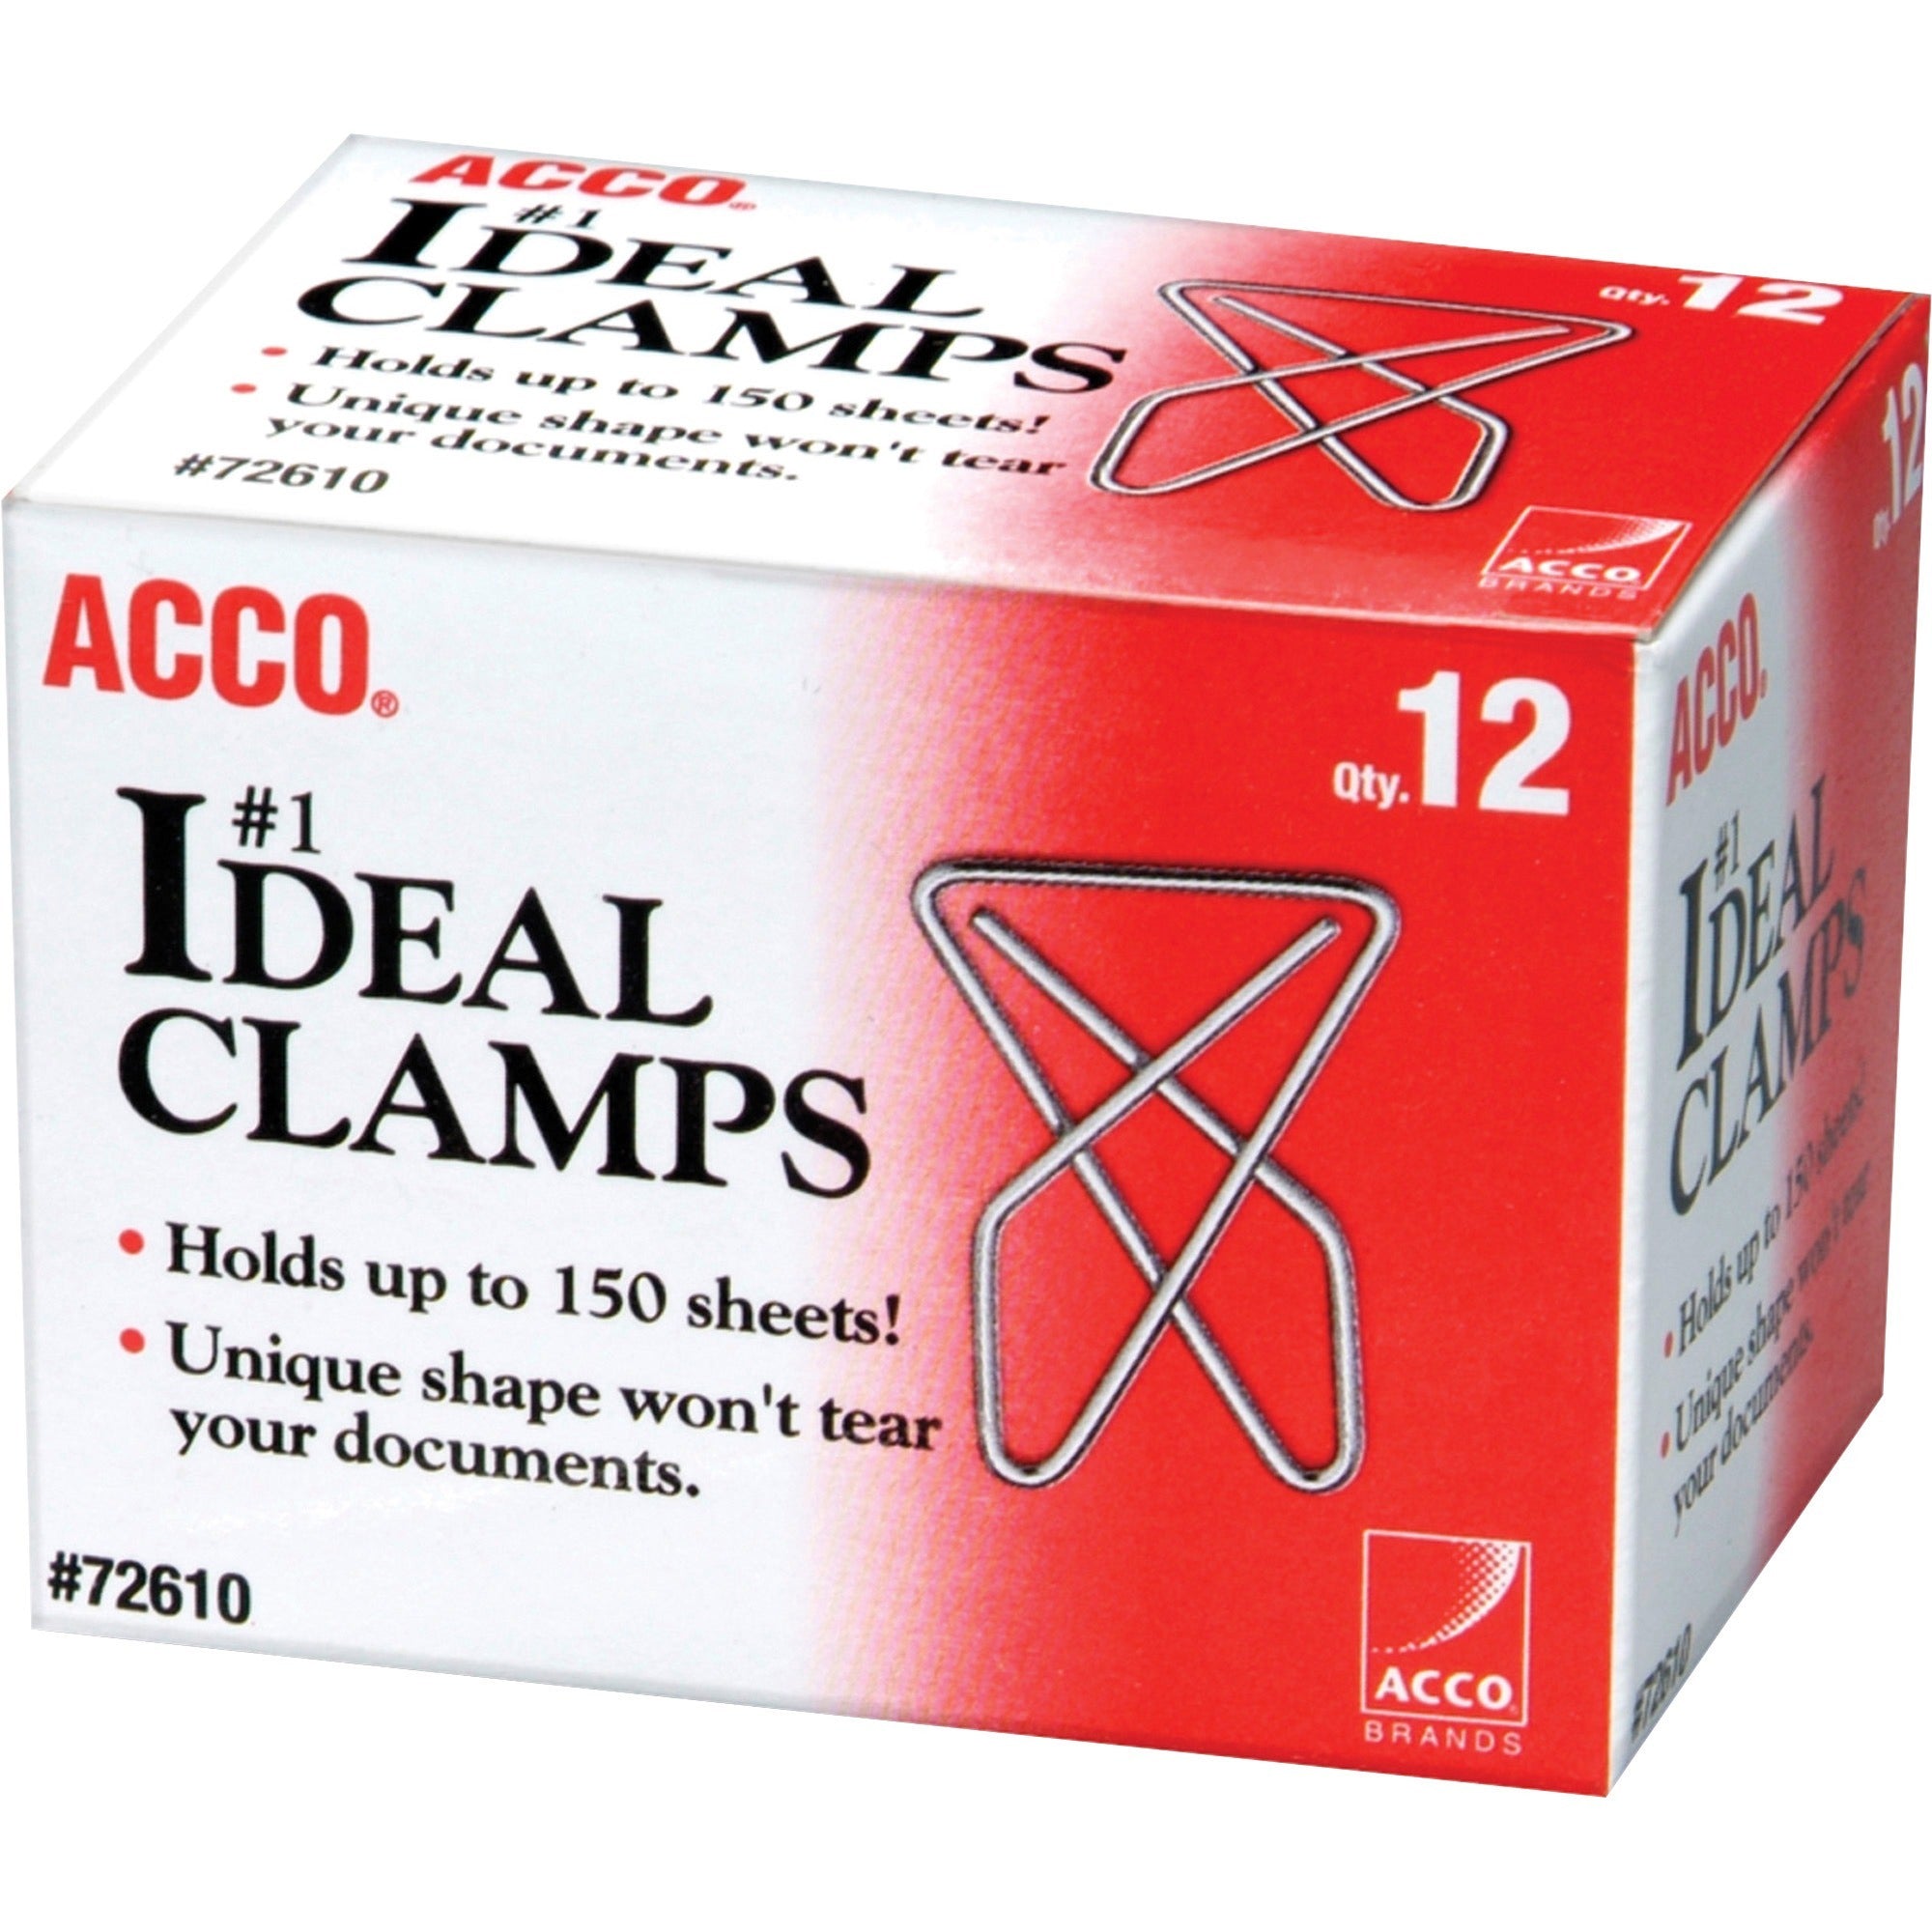 ACCO Ideal Paper Clamps - Large - No. 1 - 150 Sheet Capacity - 12 / Box - Silver - Metal - 